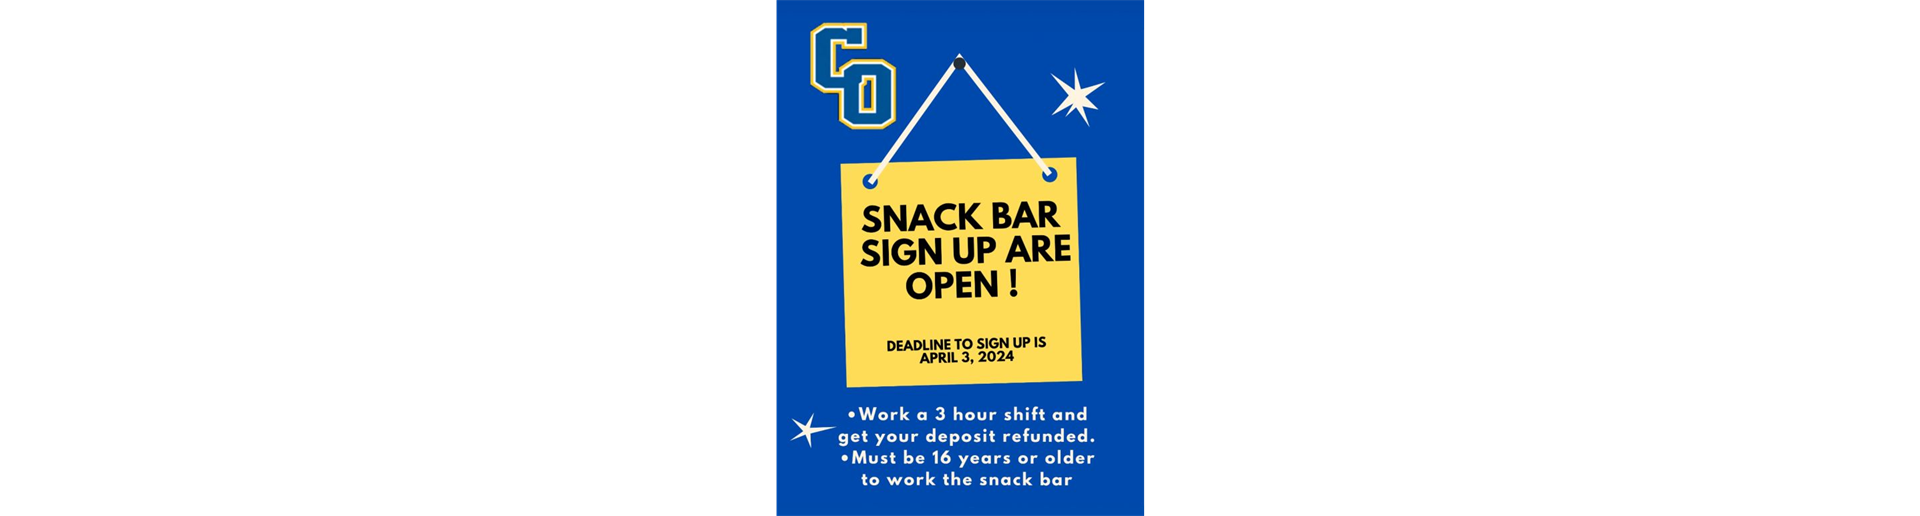 Snack Bar Sign ups available